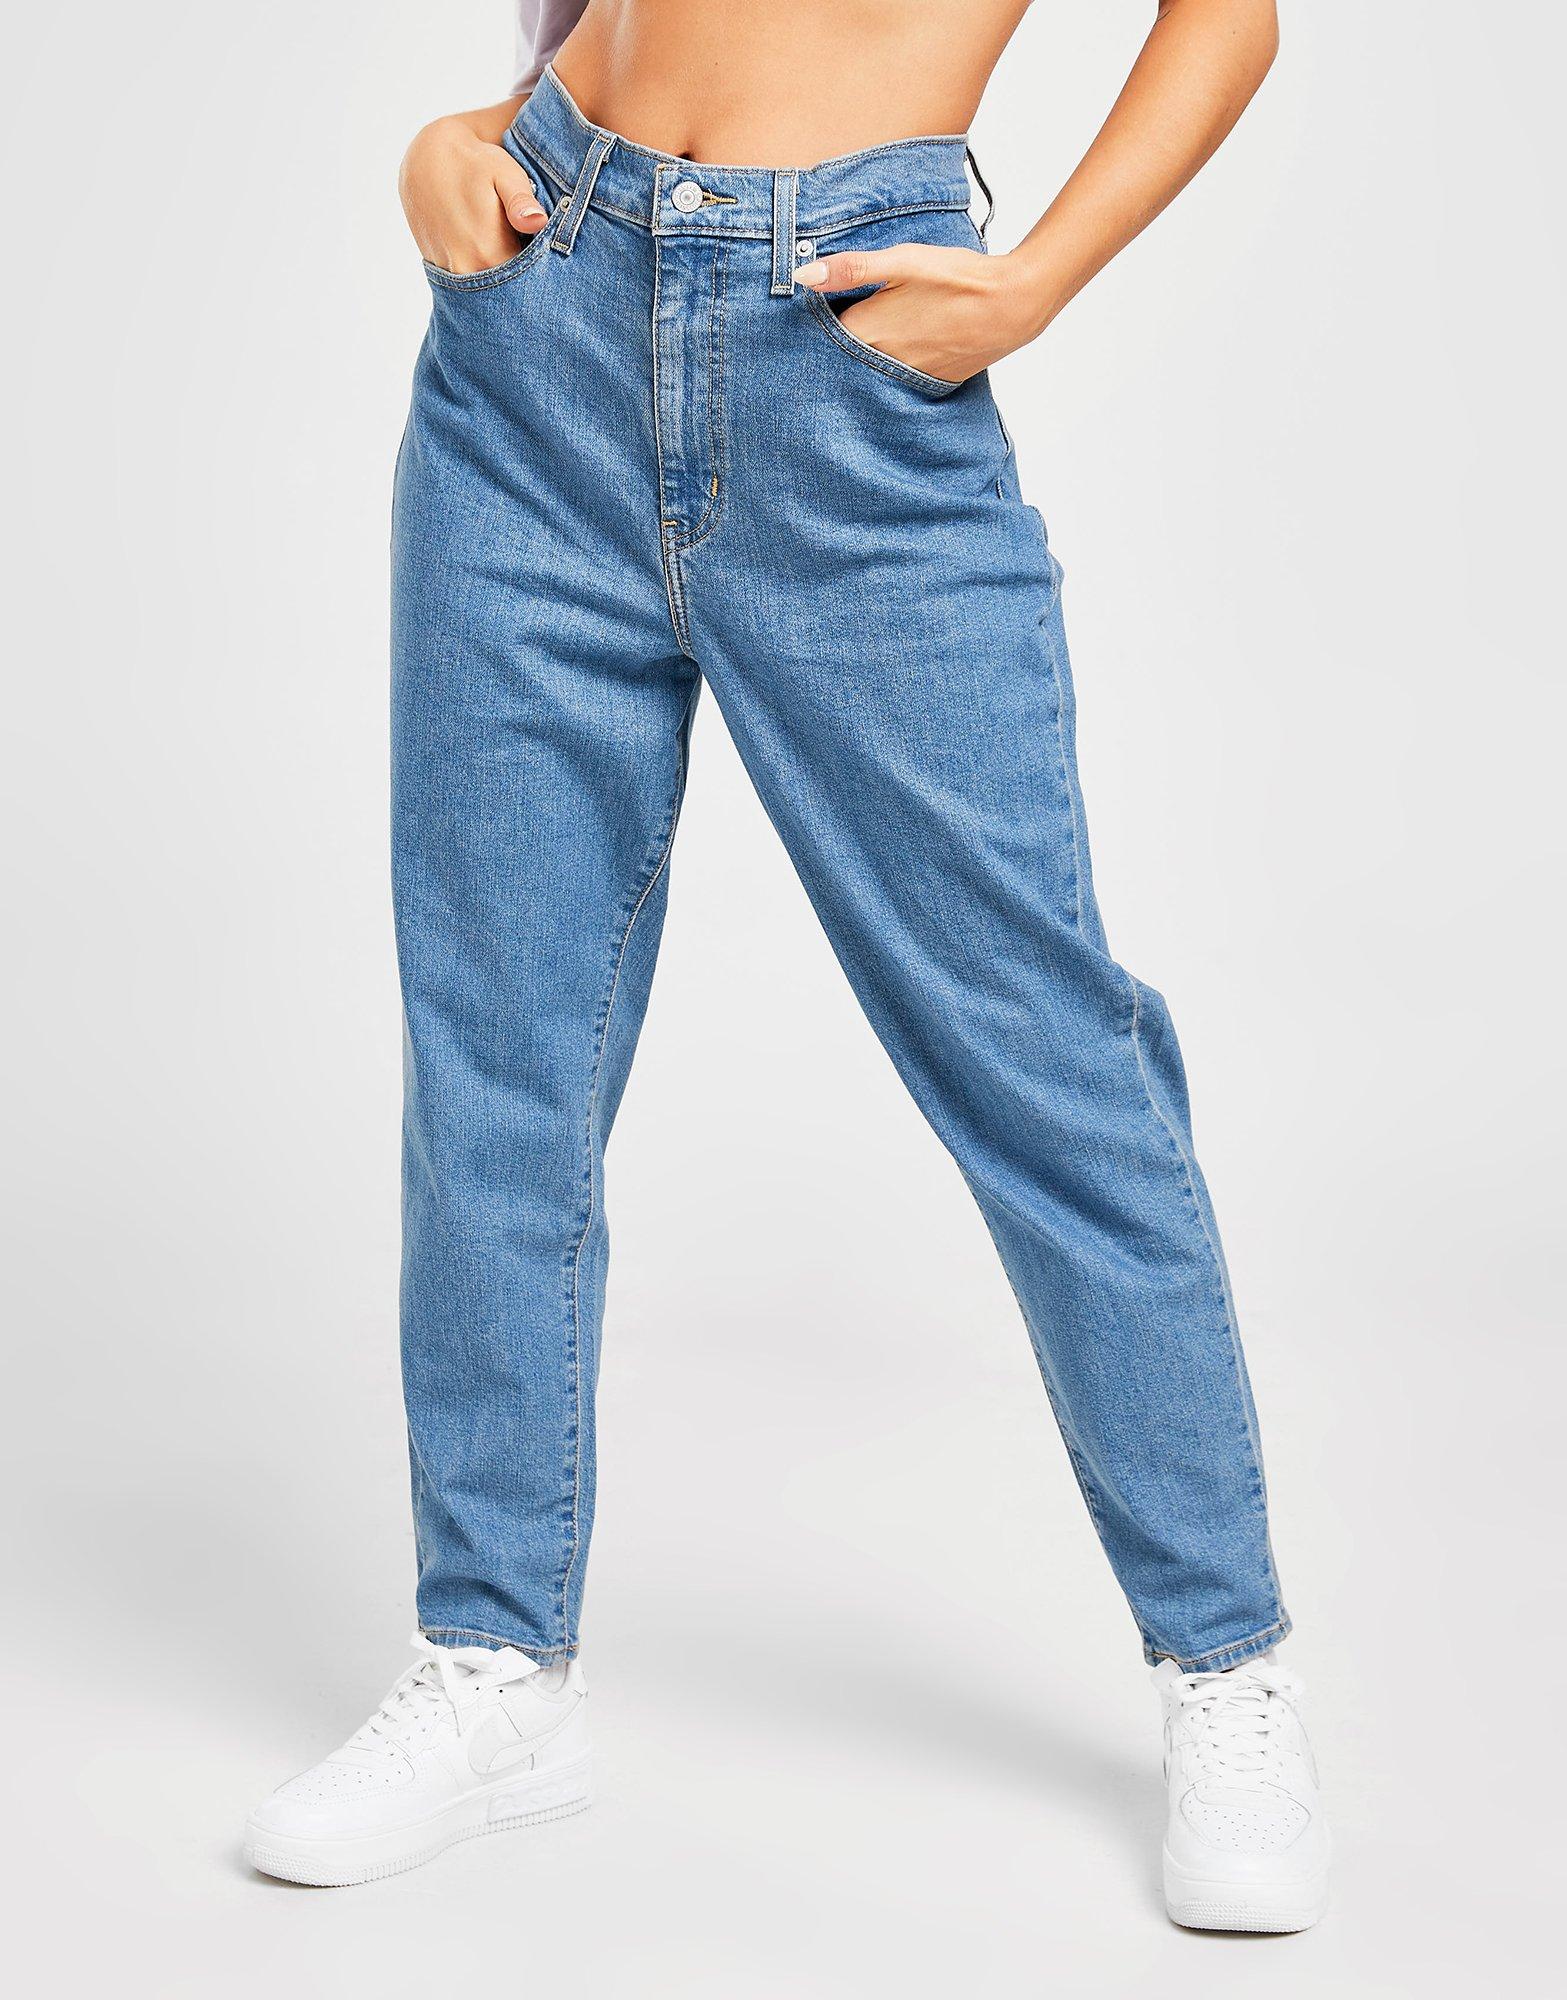 levis mom jeans review